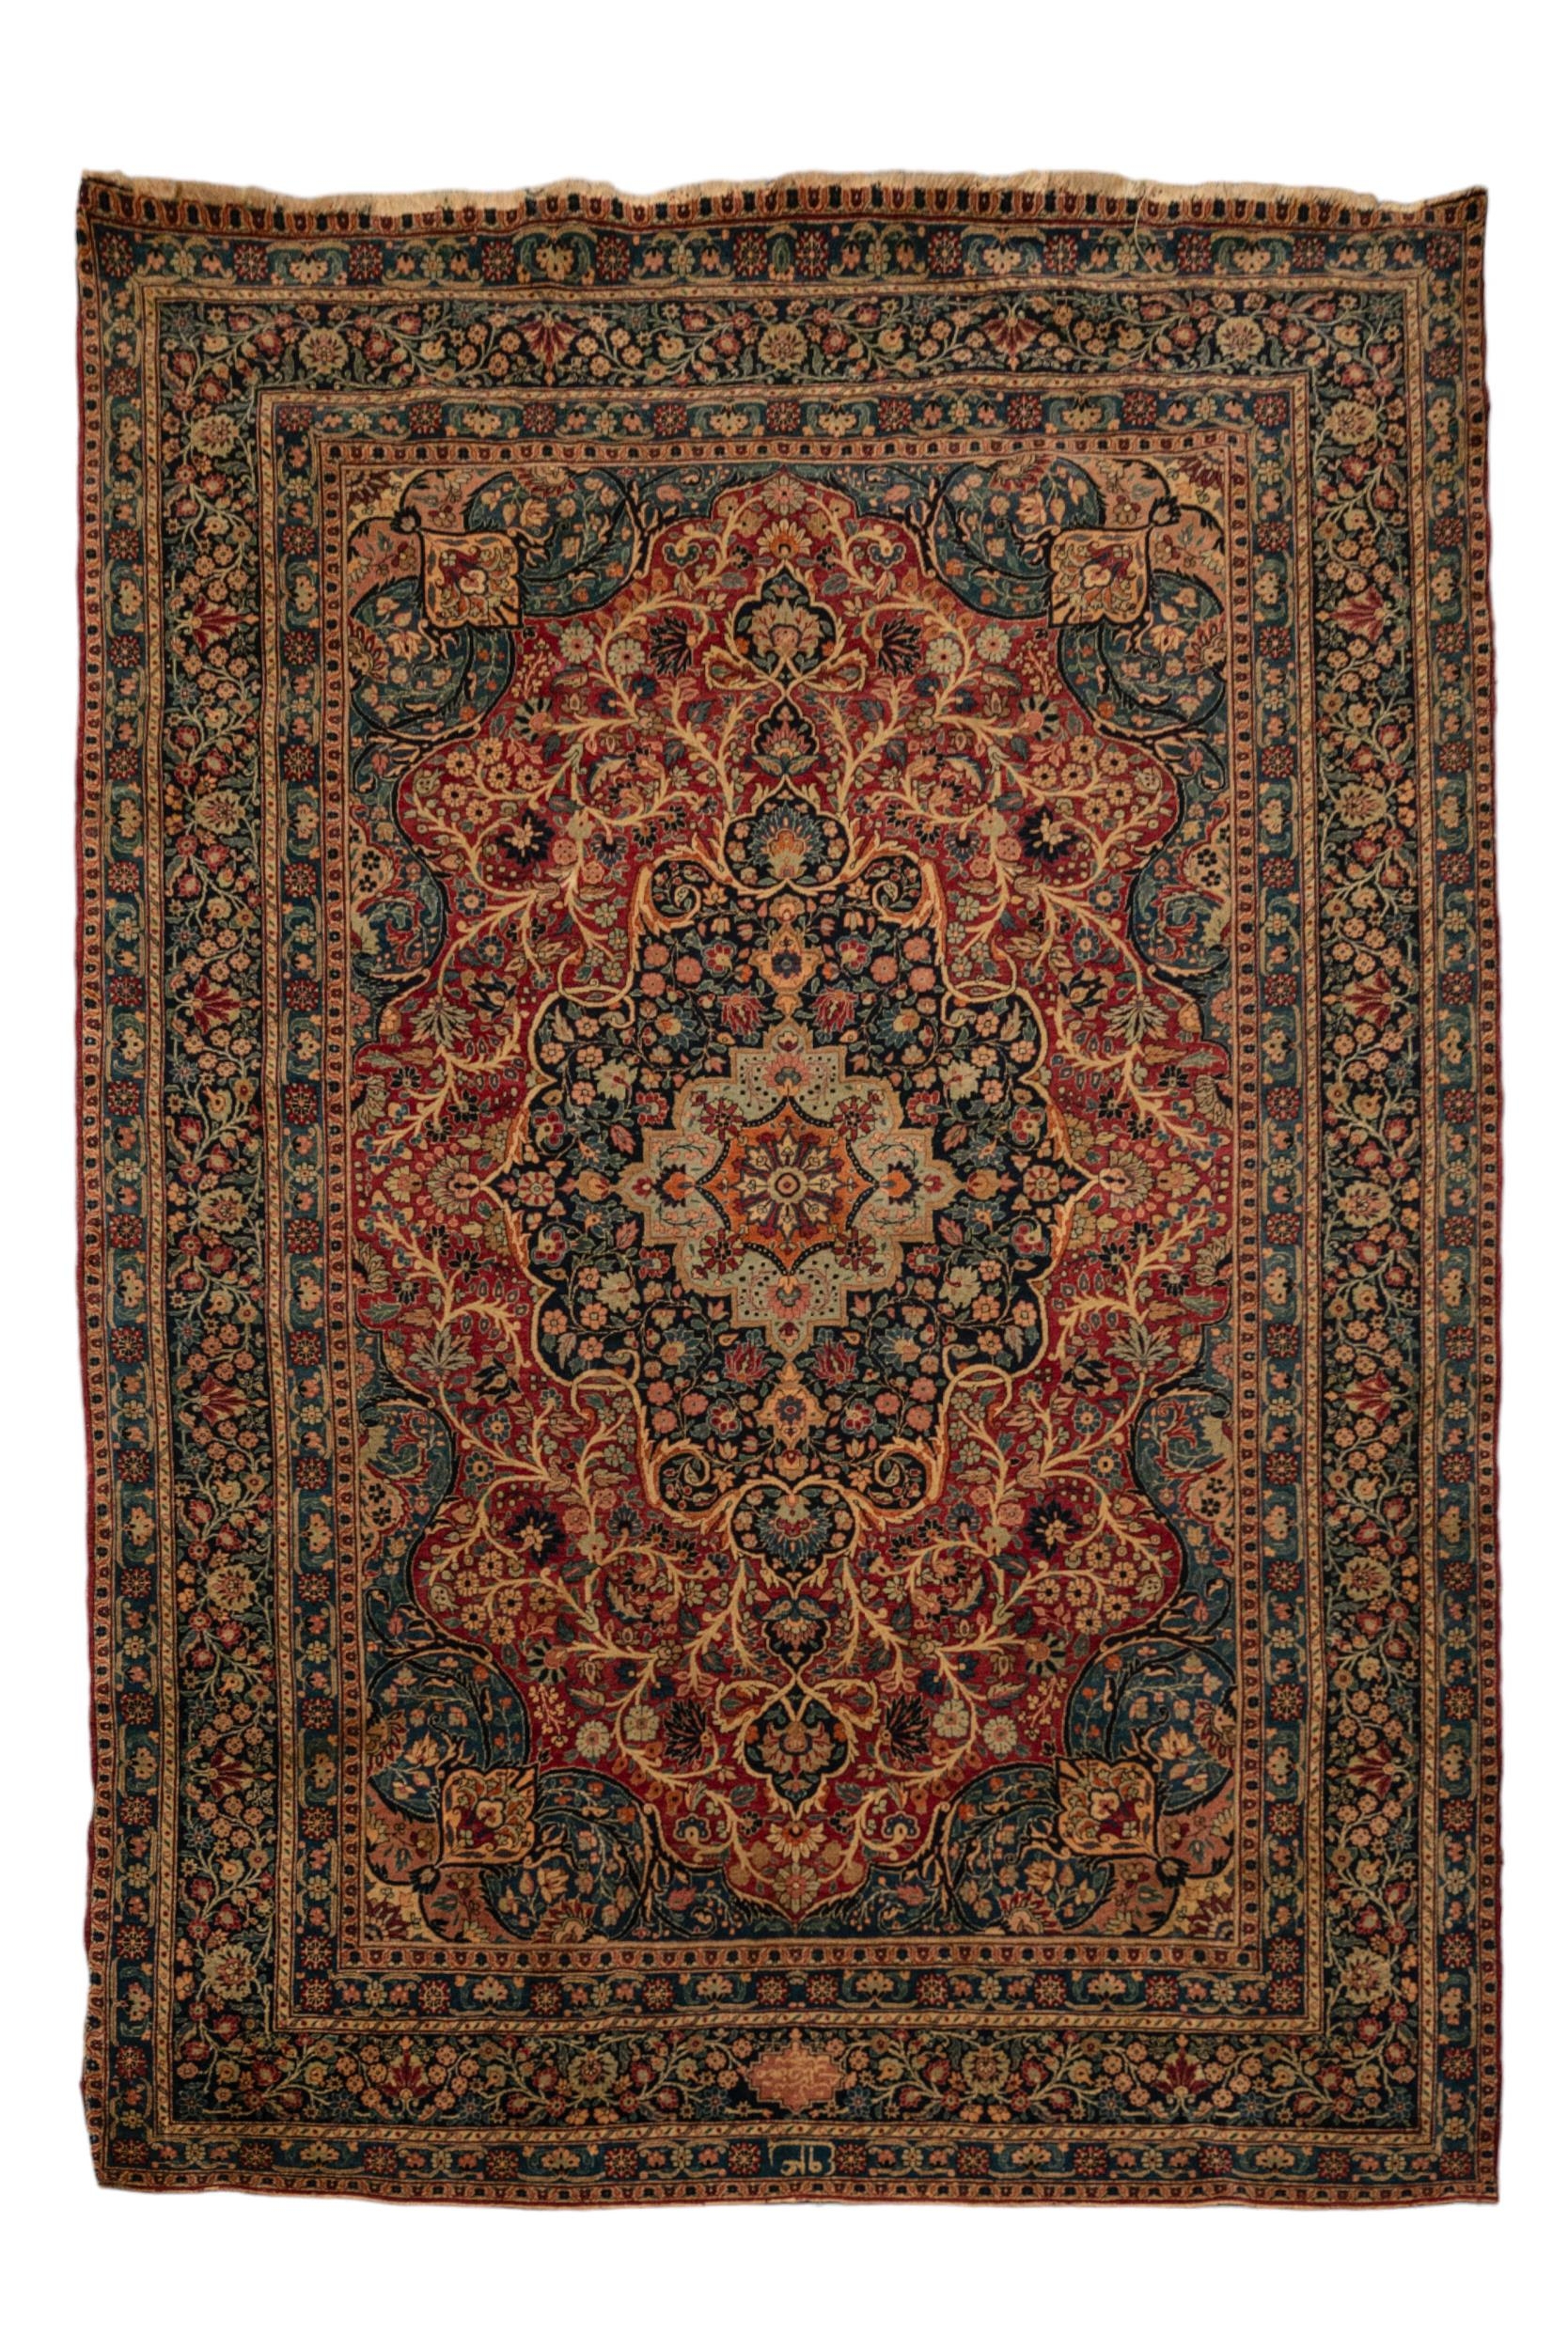 AN EXCEPTIONAL HAND KNOTTED PERSIAN RUG, LATE 19TH / EARLY 20TH CENTURY, probably Keshan, signed,